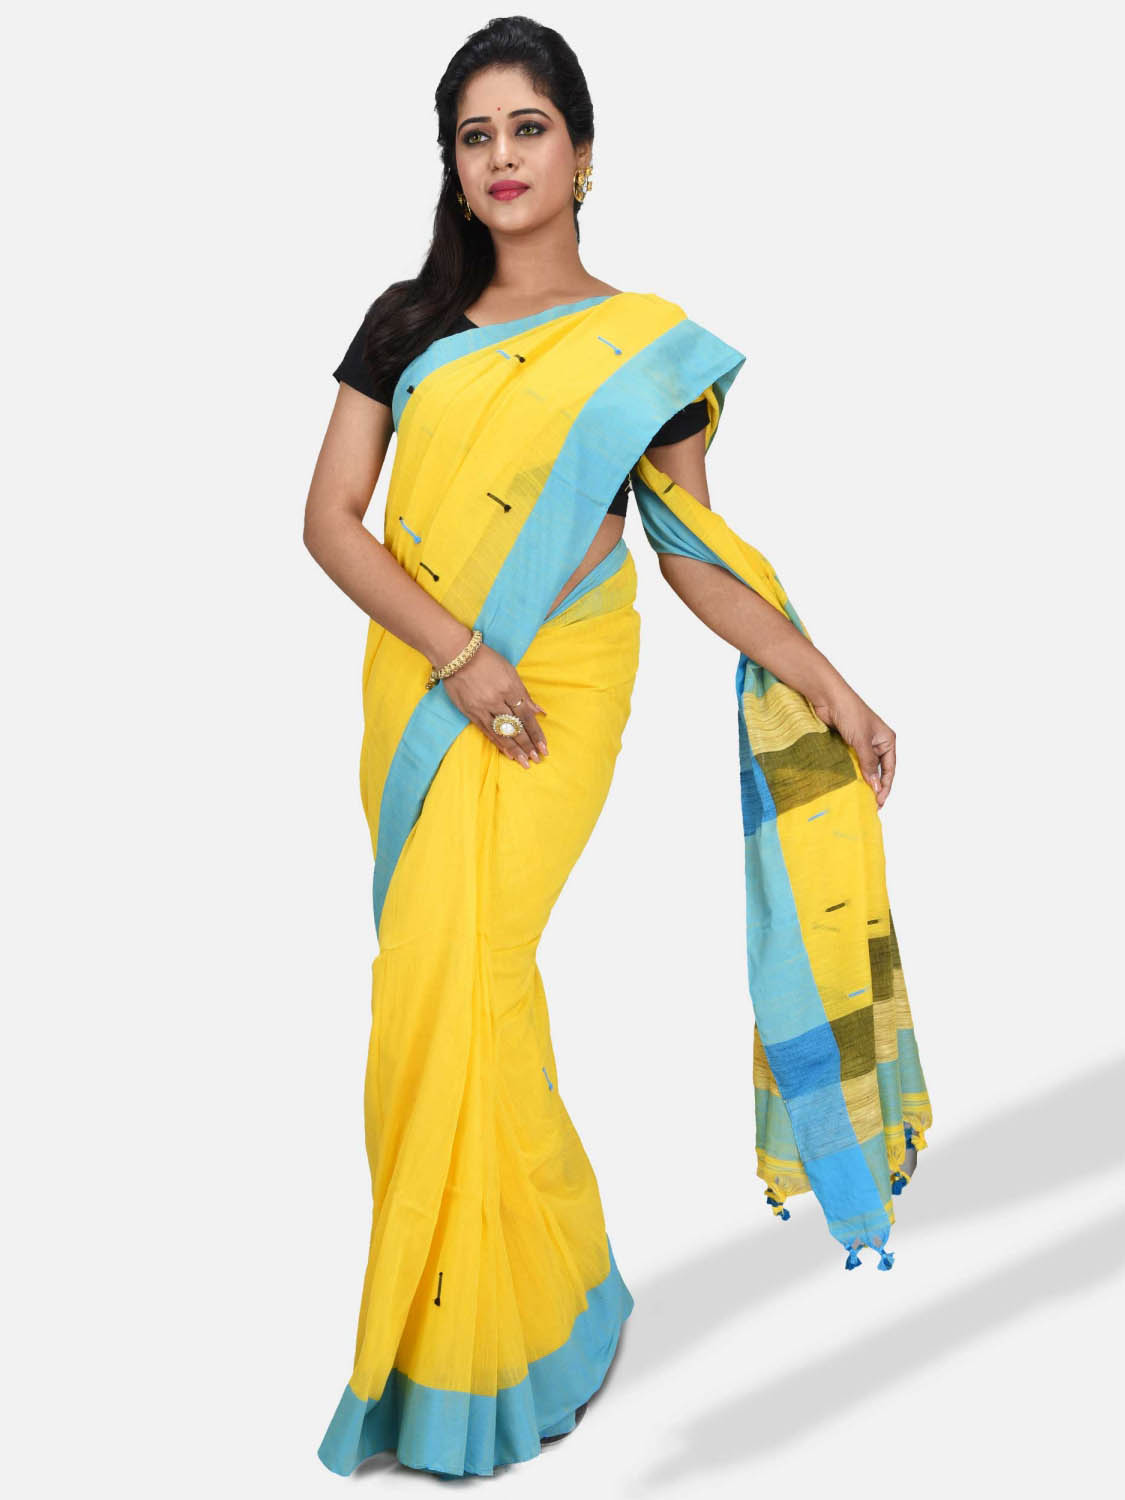 Pure Cotton 100% Traditional Yellow Bengali Handloom Tant Saree Very Soft Cotton Materials"Clical Desigined" With Blouse Picas